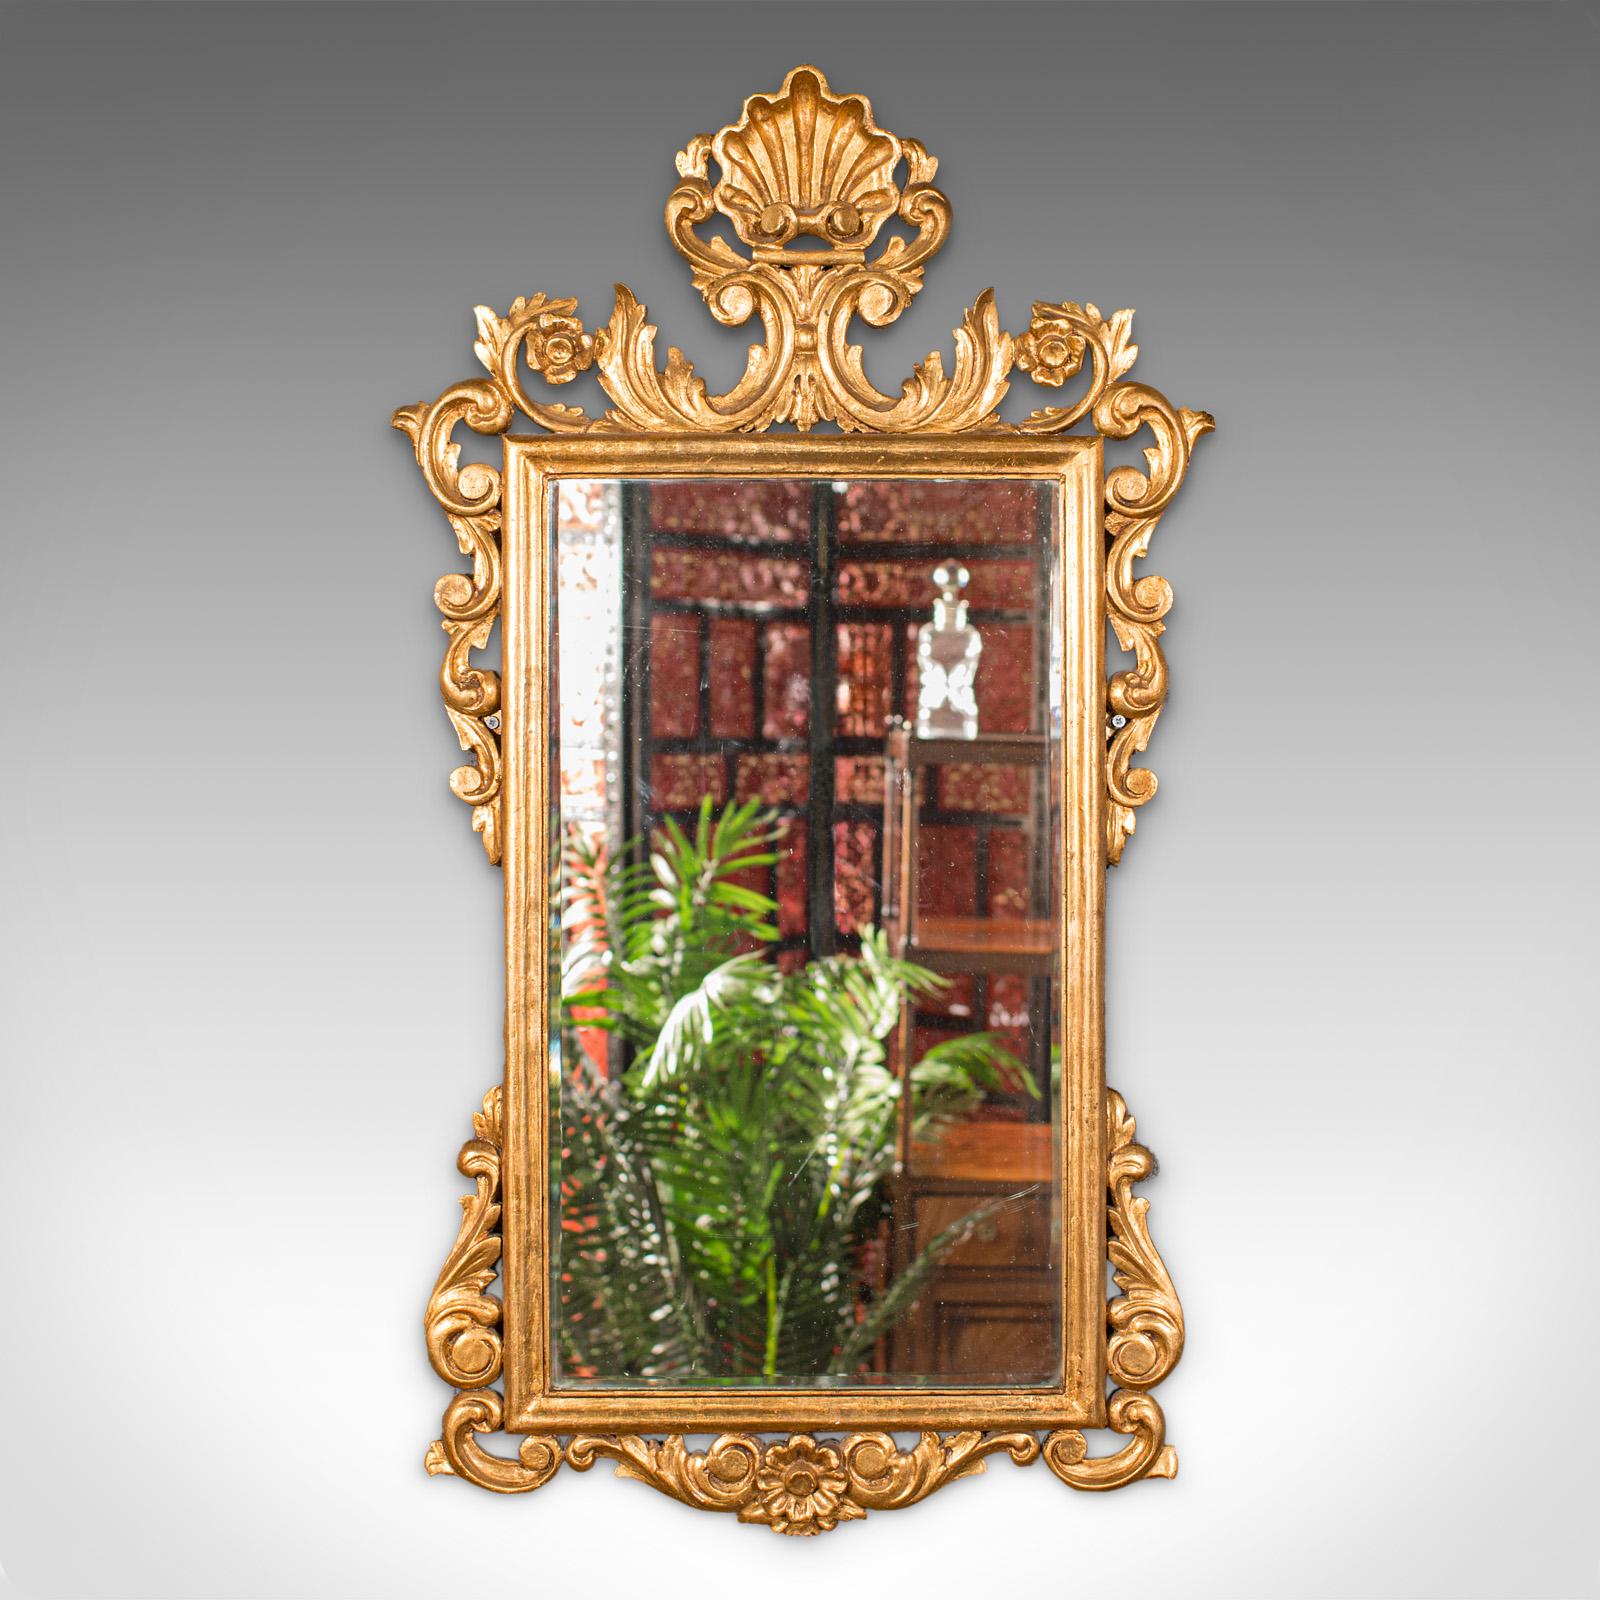 This is an ornate antique mirror. A Continental, giltwood and glass hall or overmantle mirror, dating to the late Victorian period, circa 1890.

Expressive show frame adds a wonderful decorative appeal
Displaying a desirable aged patina - frame in